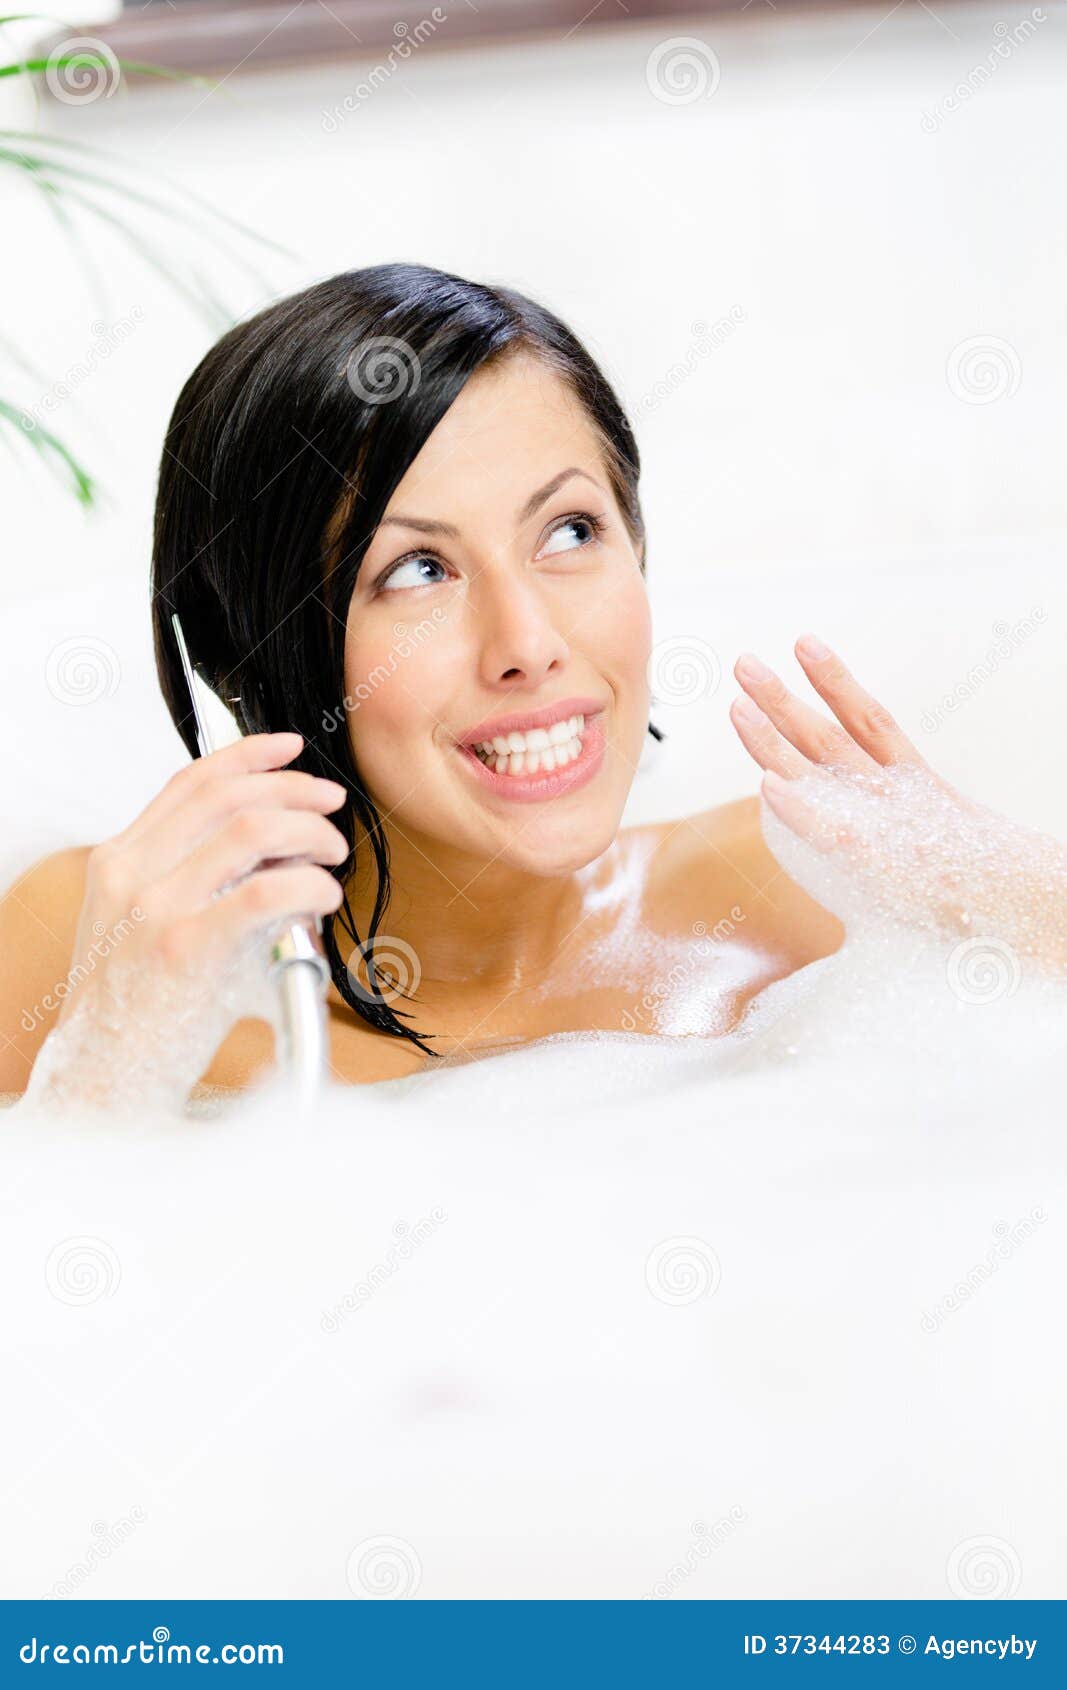 Woman Lying In Bathtub Plays With Shower Head Stock Image Image Of Beautiful Bath 37344283